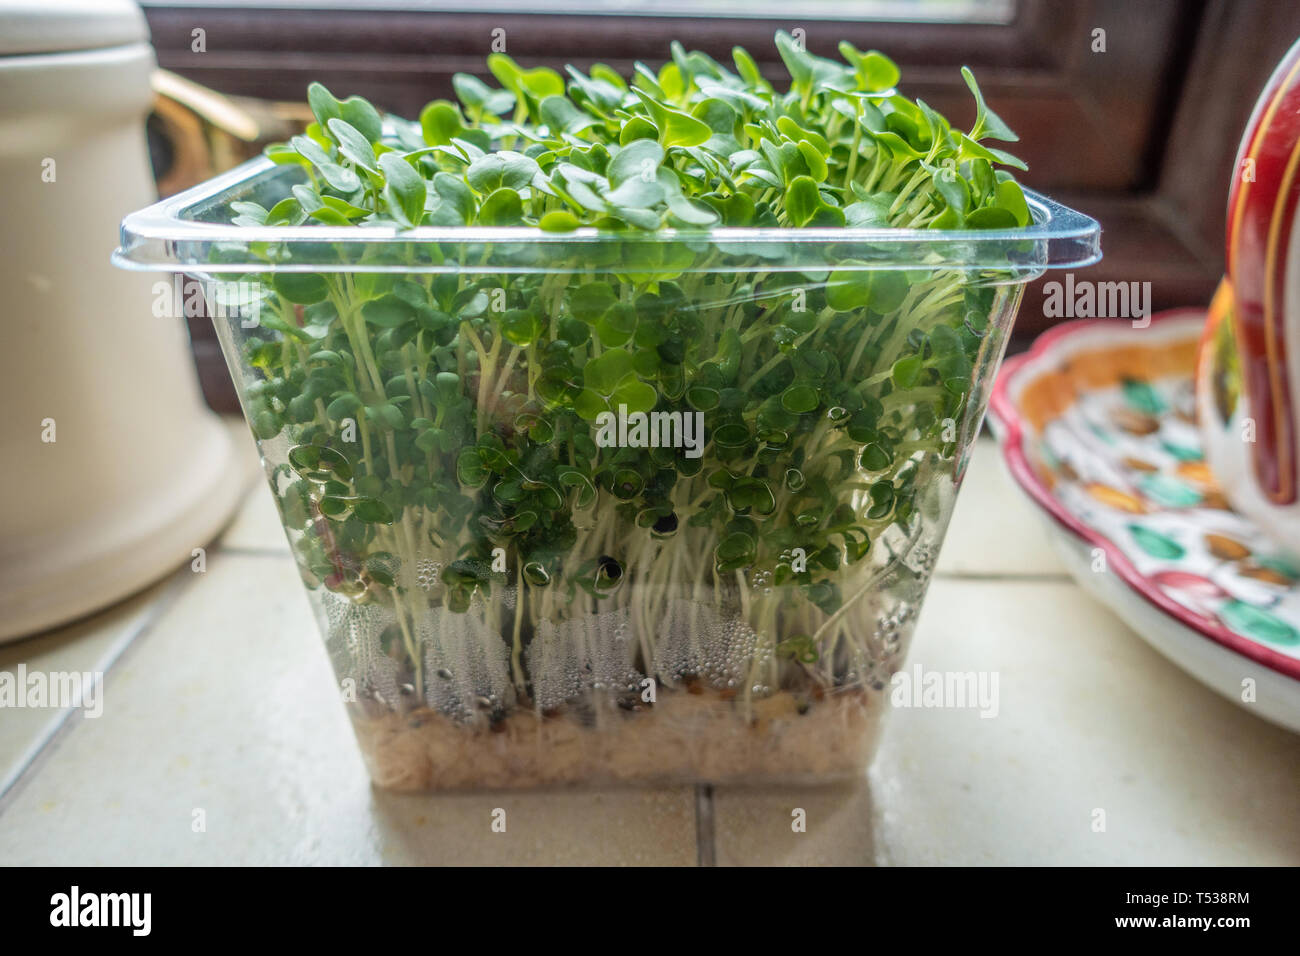 A tub of supermarket garden cress sits on a kitchen window sill. Stock Photo